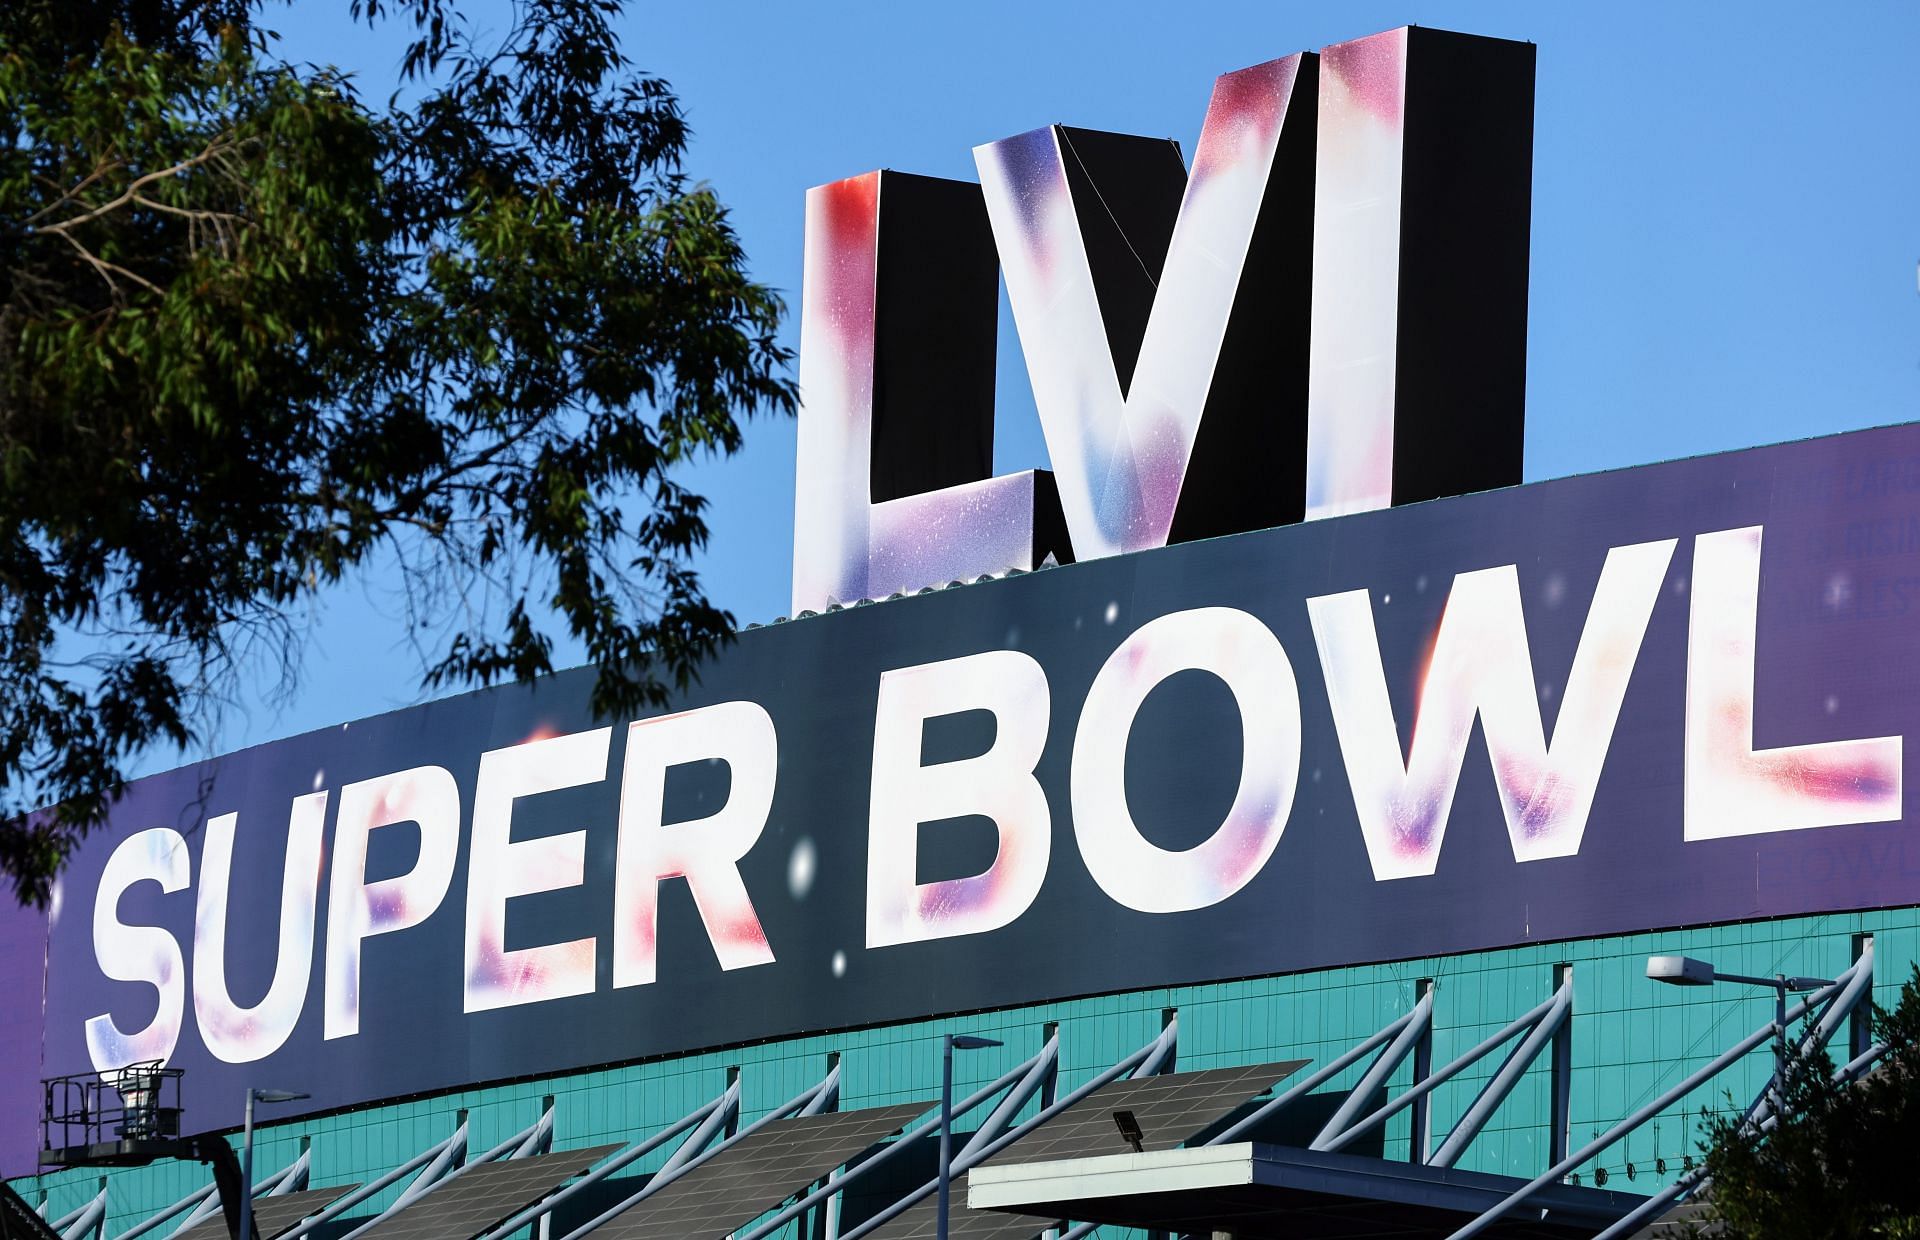 Super Bowl LVI is officially upon us as the Cinncinati Bengals take on the LA Rams